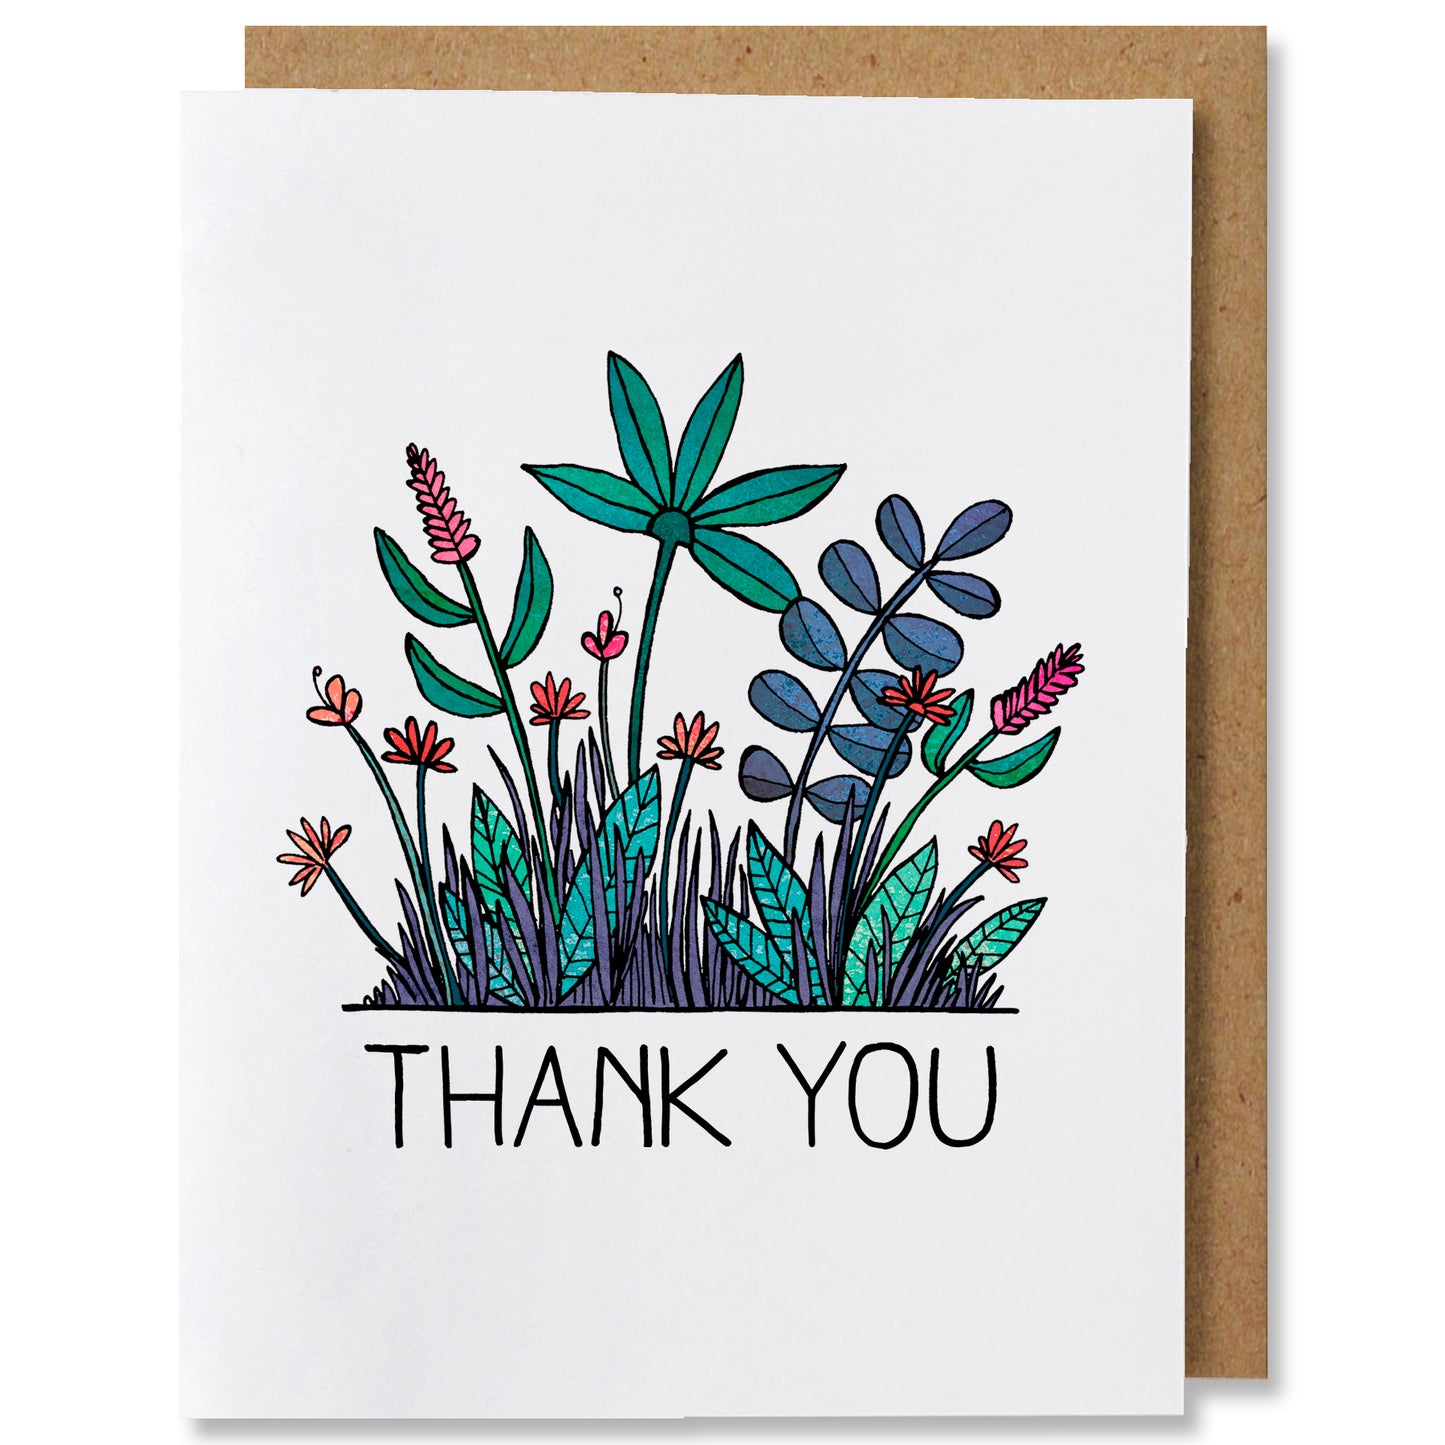 Illustrated greeting card featuring grass, leaves, and flowering plants in shades of blue, turquoise and reds growing from the ground with the words “Thank you” underneath